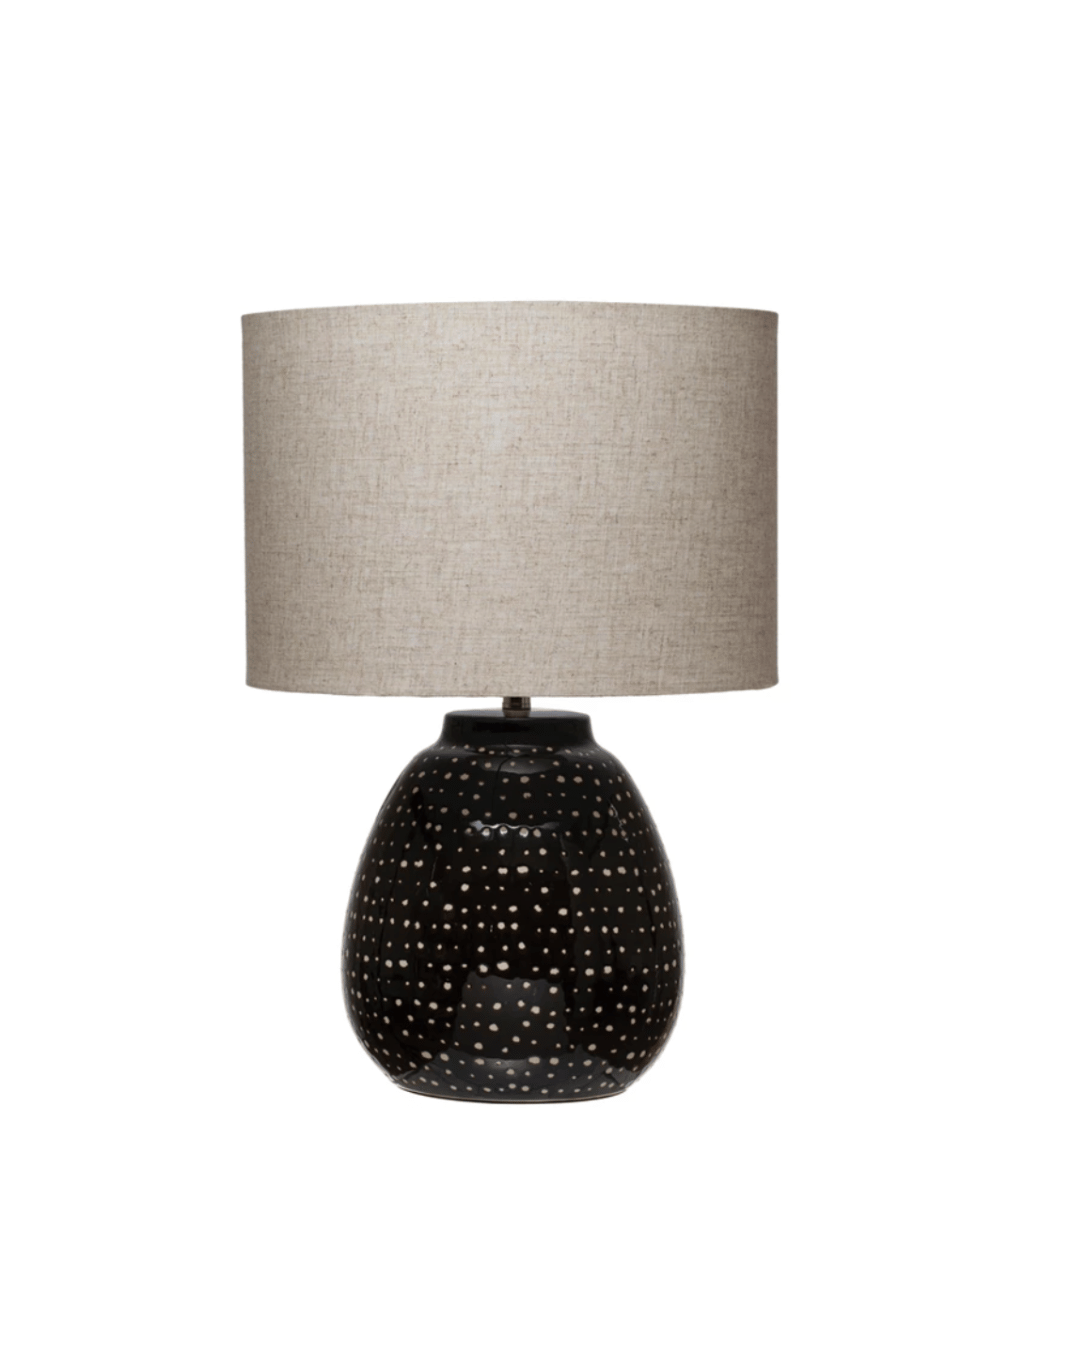 A Stone Table Lamp Black White Dots by Creative Co-op with a textured, beige drum shade and a glossy black ceramic base featuring small, round perforations allowing light to pass through, perfect for a Scottsdale Arizona bungalow.